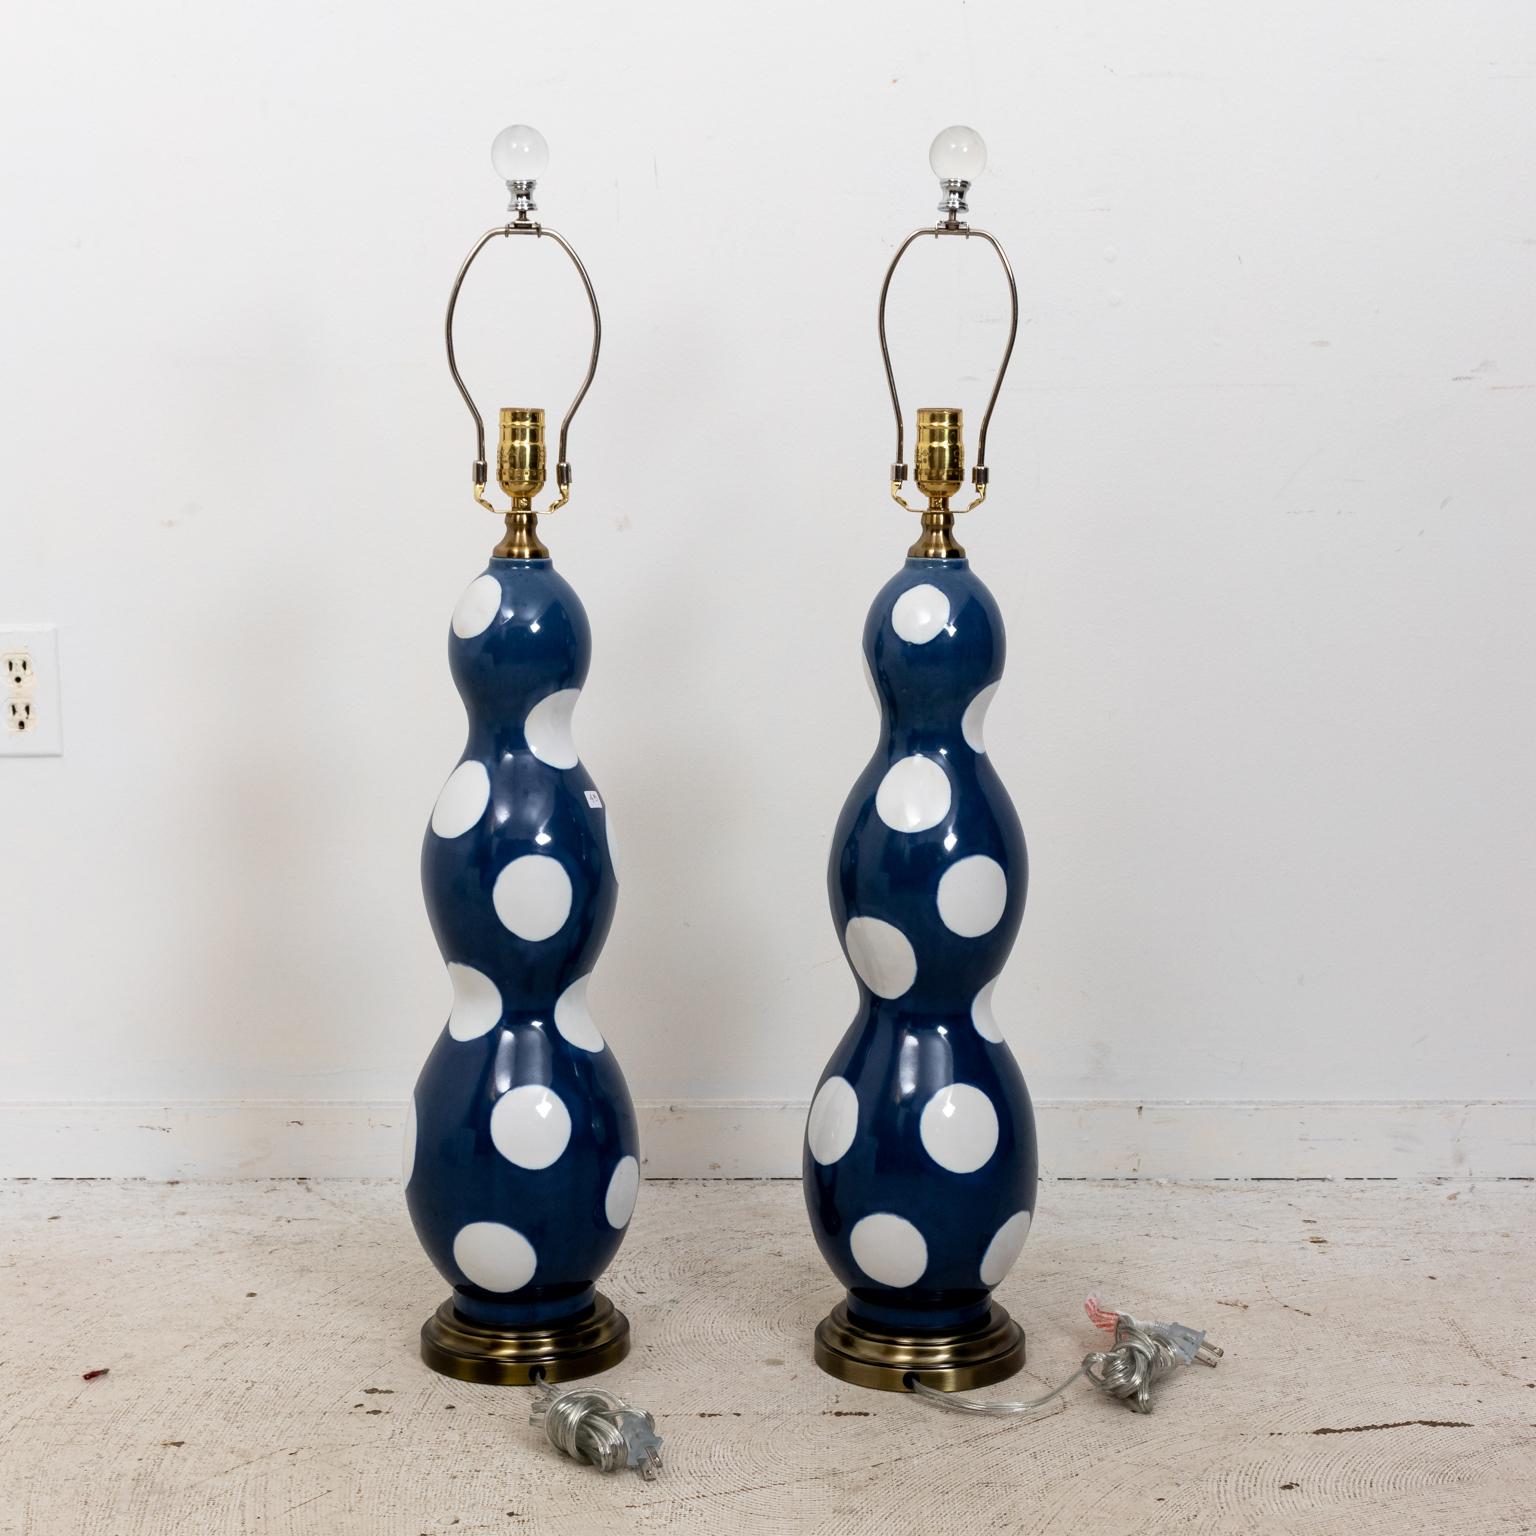 Blue painted table lamps in the Mid-Century Modern style decorated with white dots in a glazed finish. Please note of wear consistent with age. Shades not included.